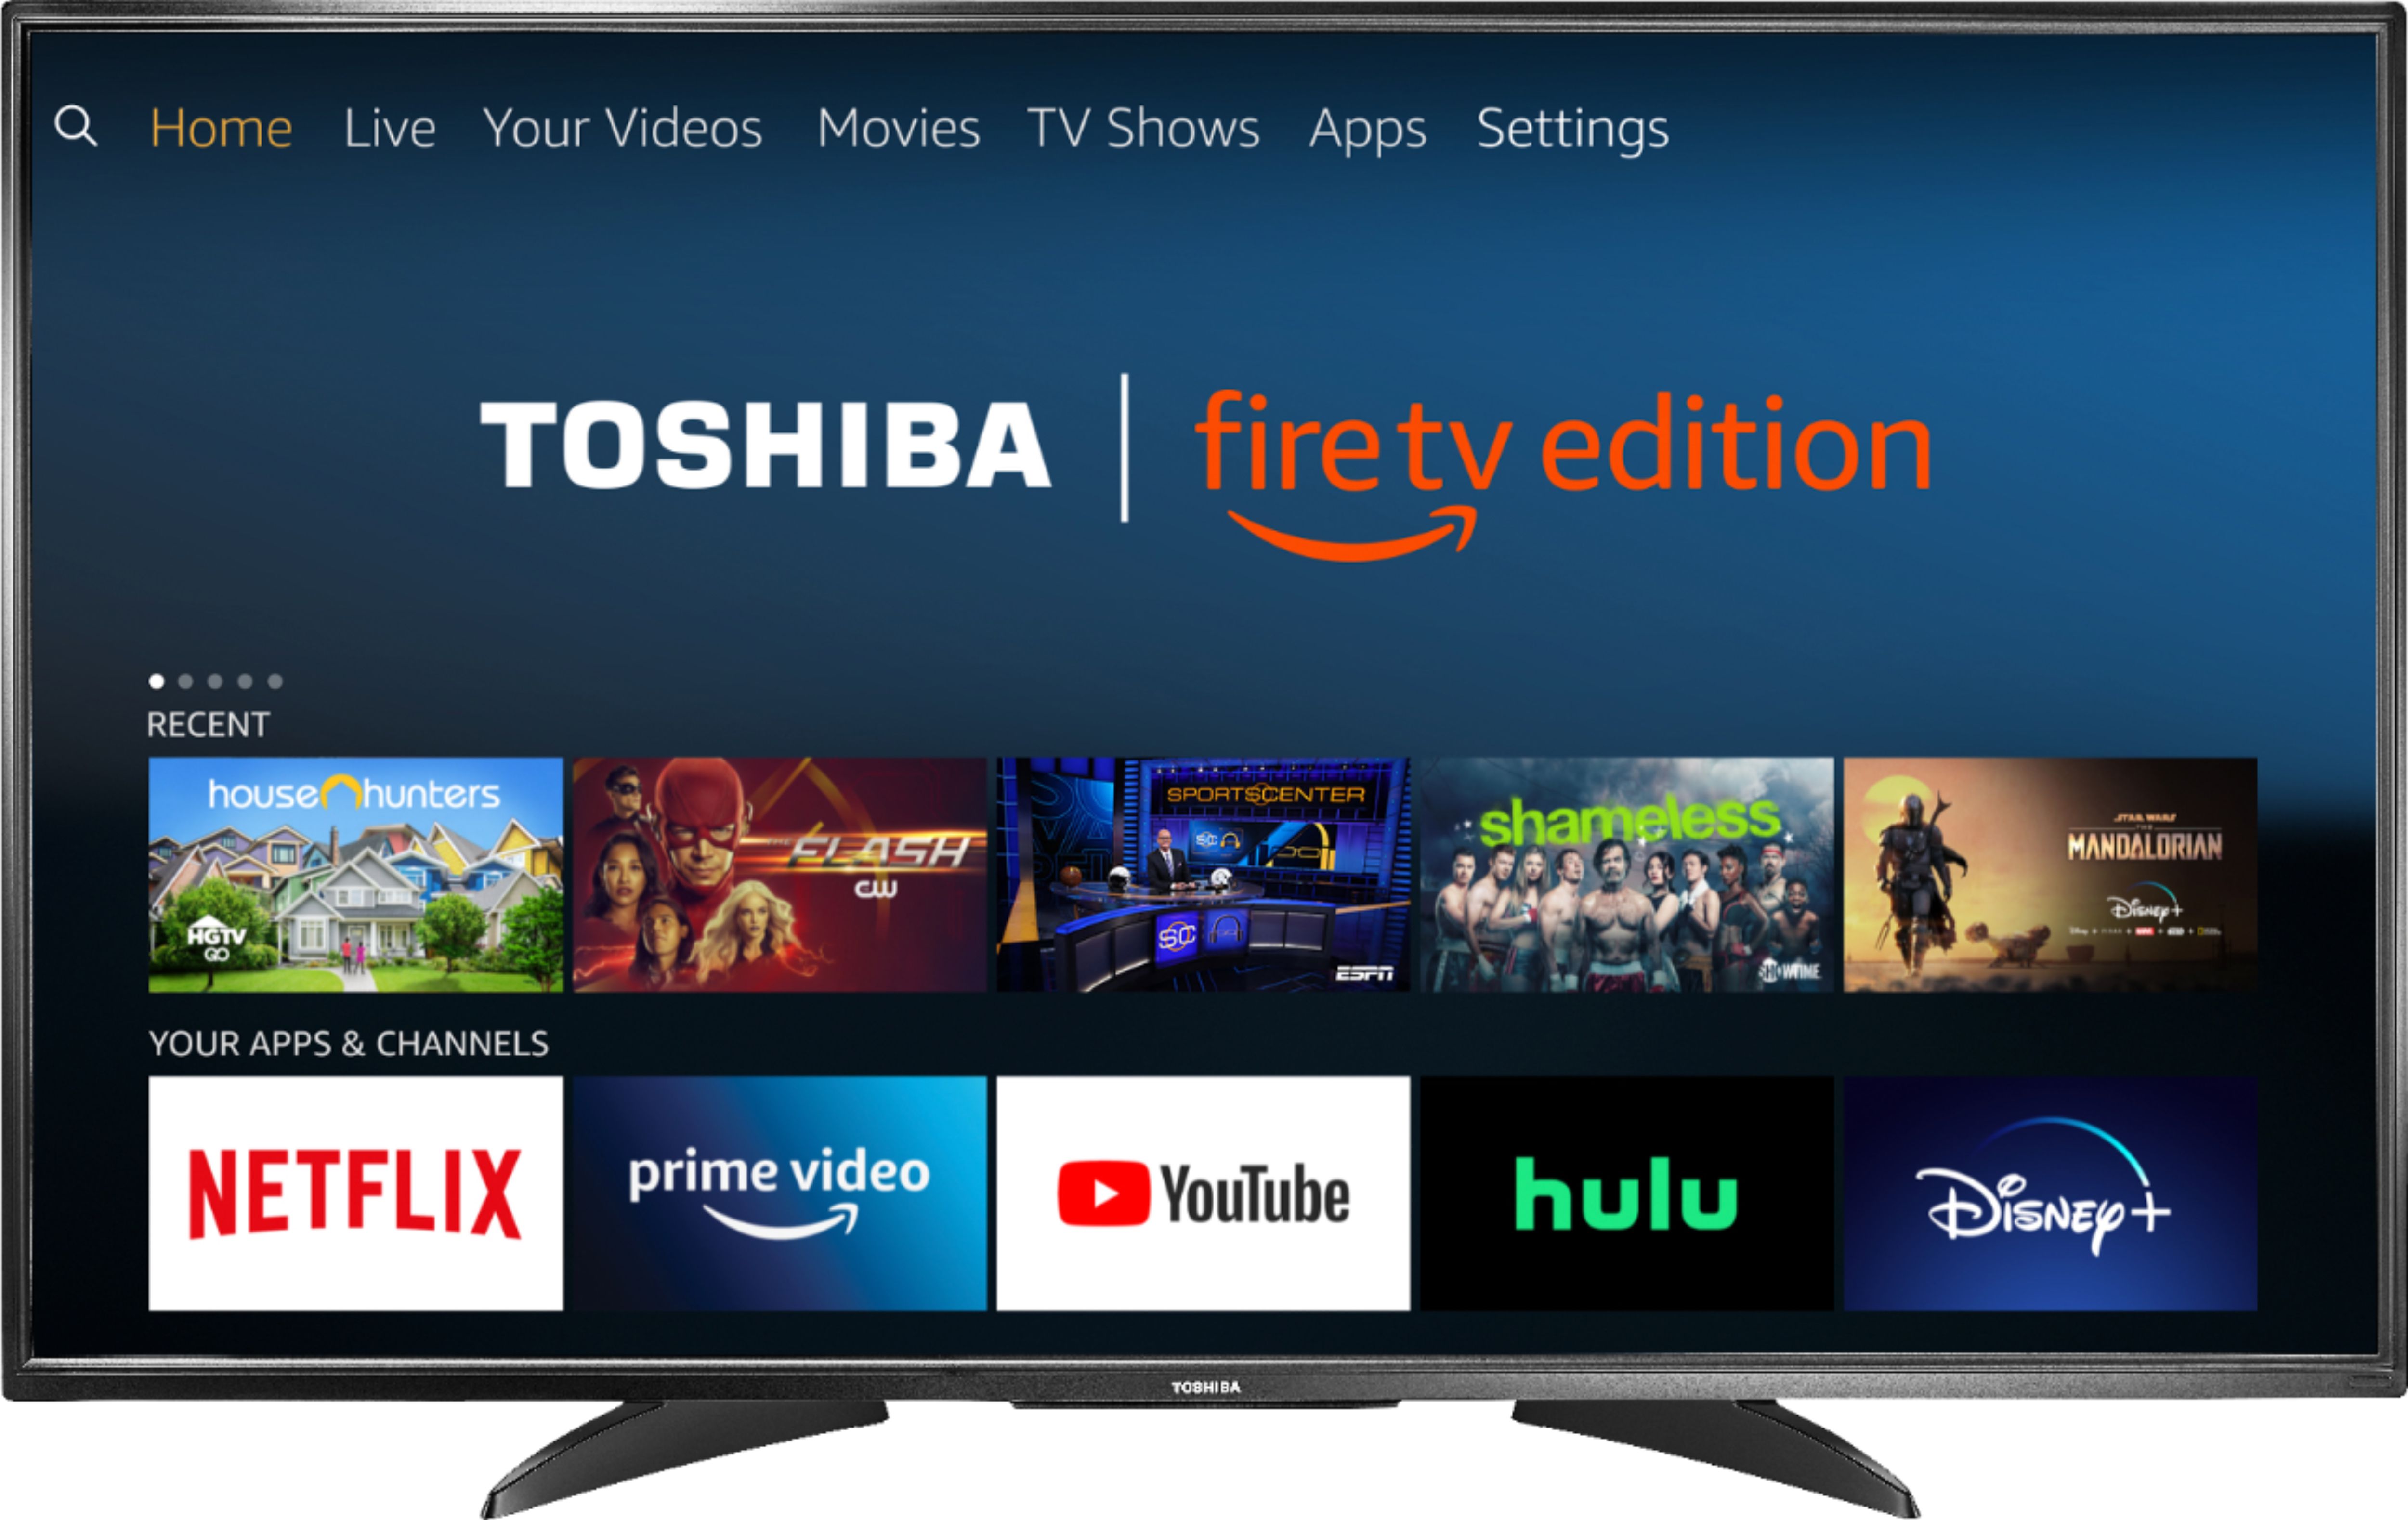 Best Buy Toshiba 55 Class Led 2160p Smart 4k Uhd Tv With Hdr Fire Tv Edition 55lf621u19